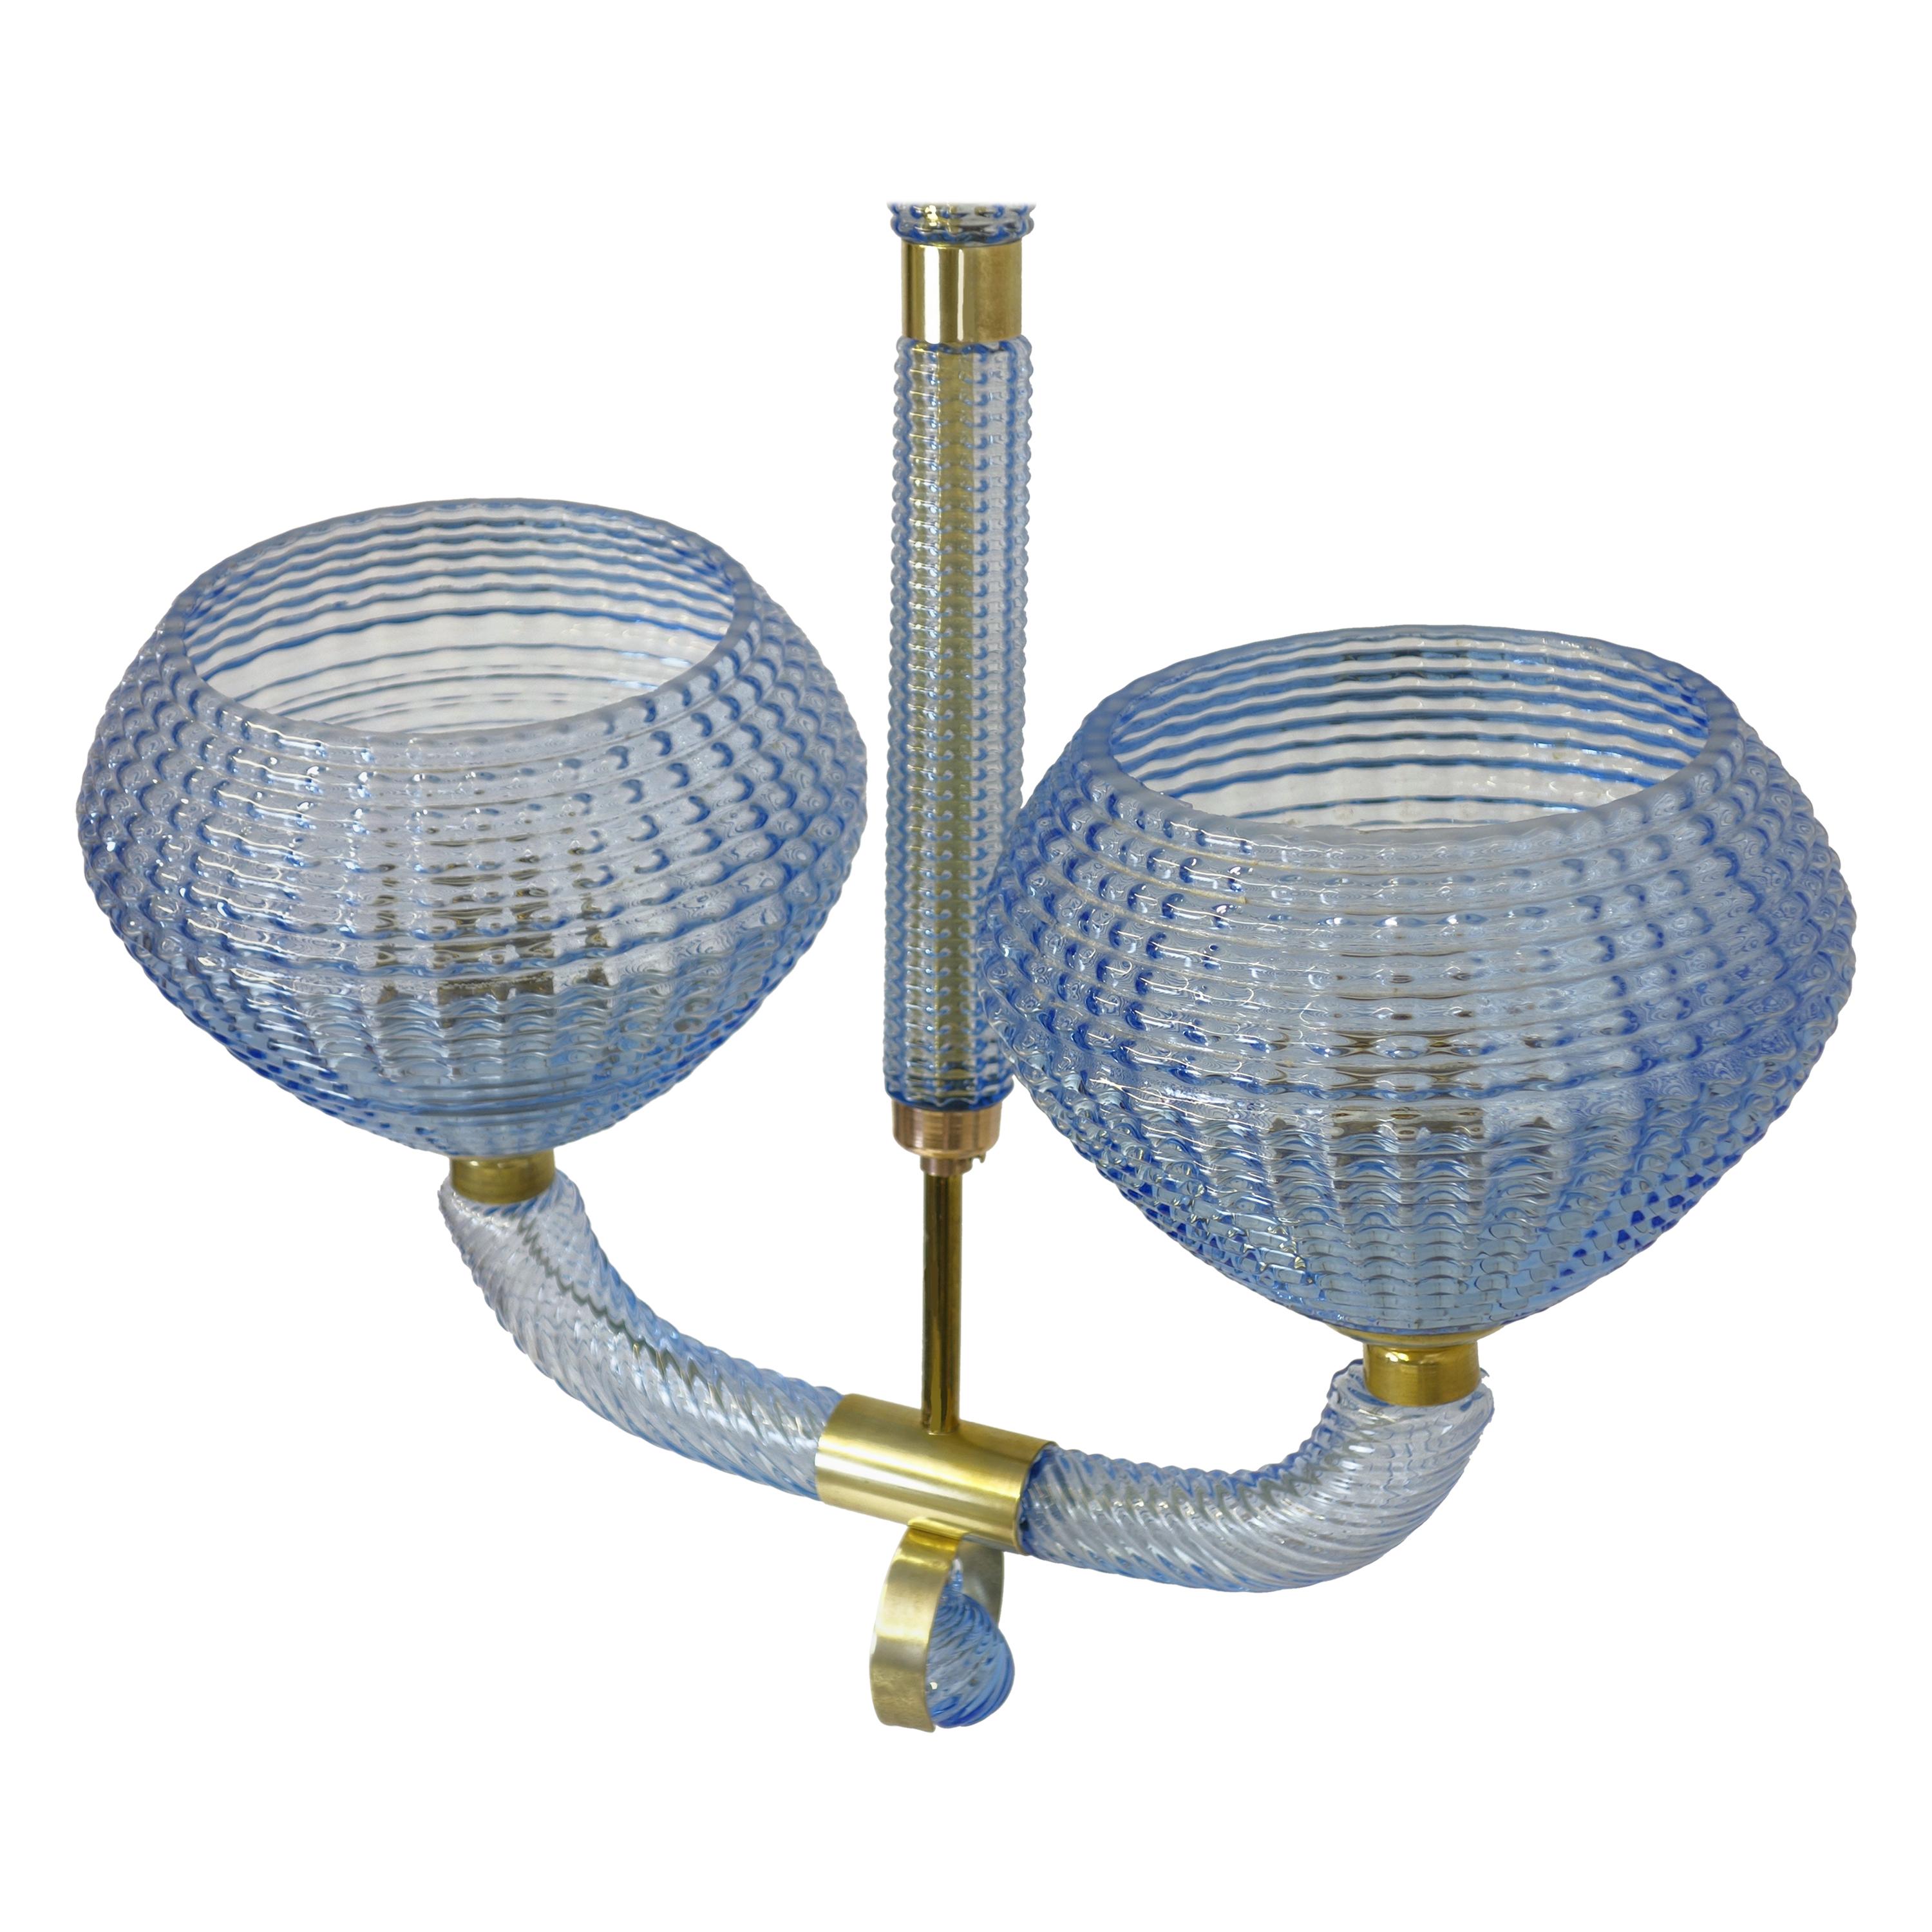 Chandelier by Barovier & Toso, Murano glass blue 1940s brass finishing